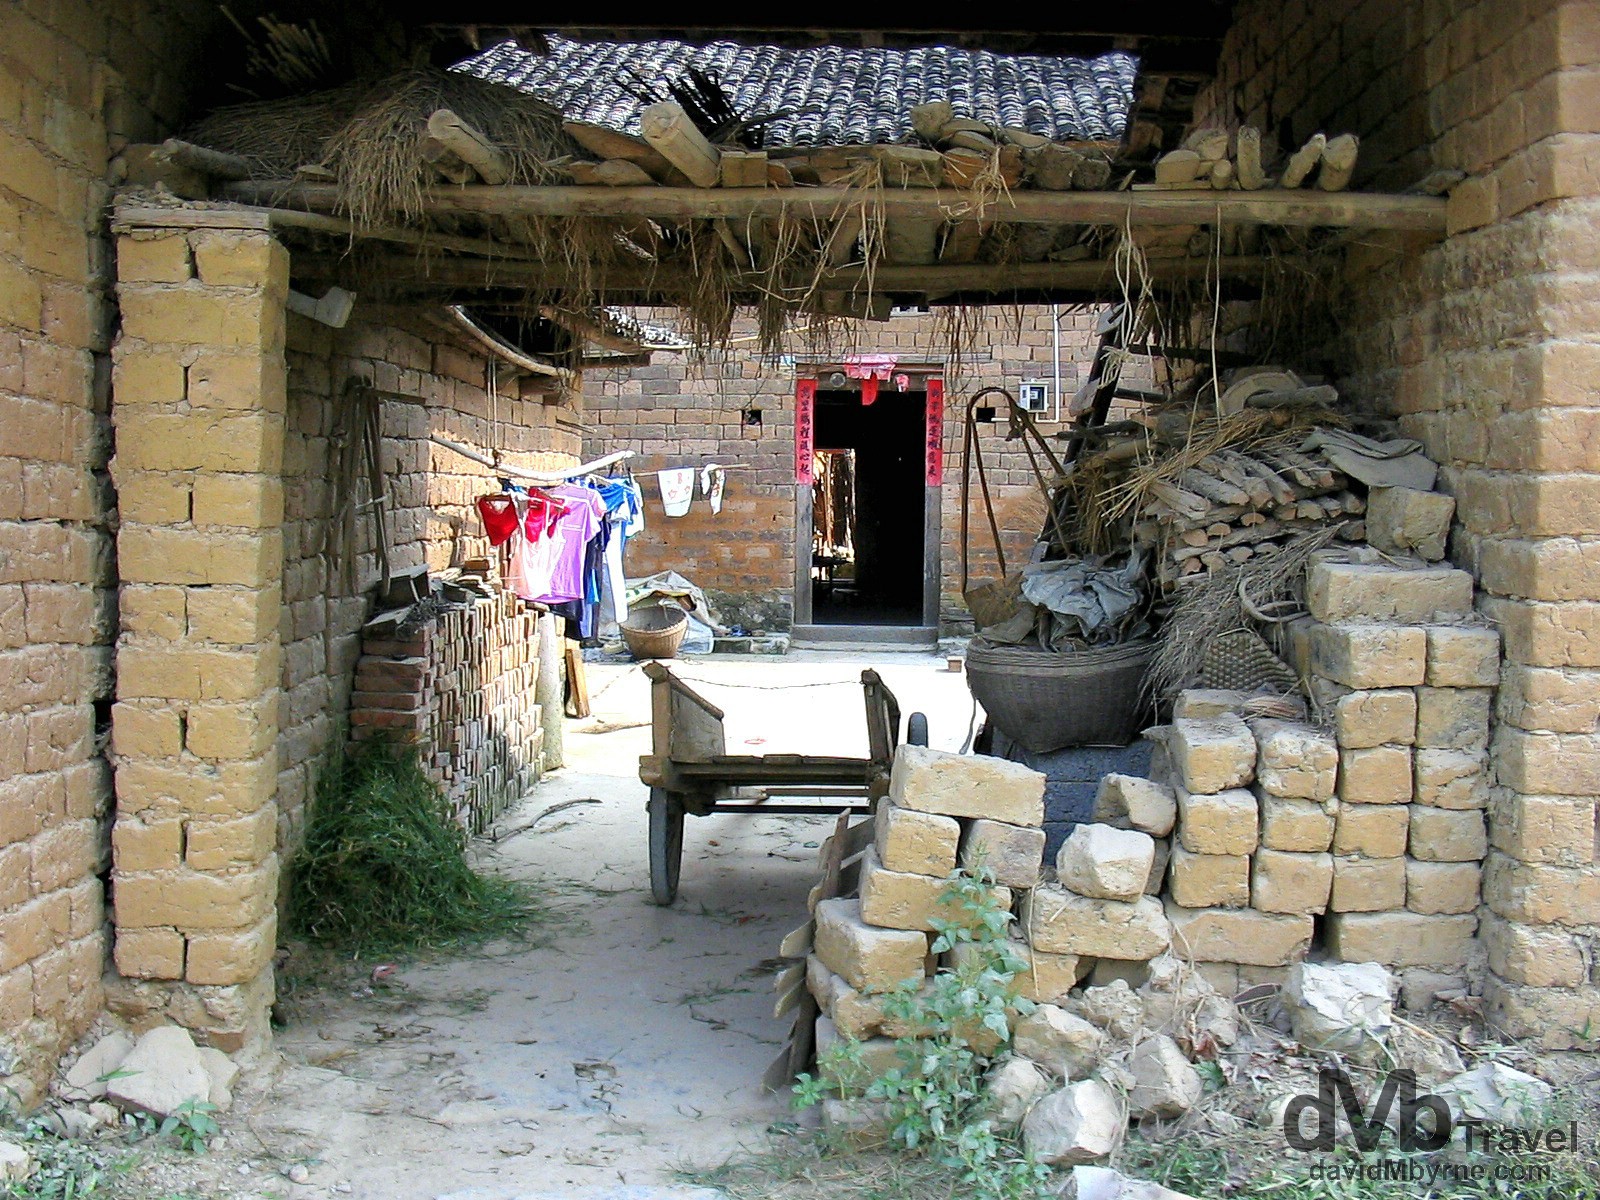 A village in the countryside outside Yangshou, Guangxi Province, Southern China. September 11th, 2004.